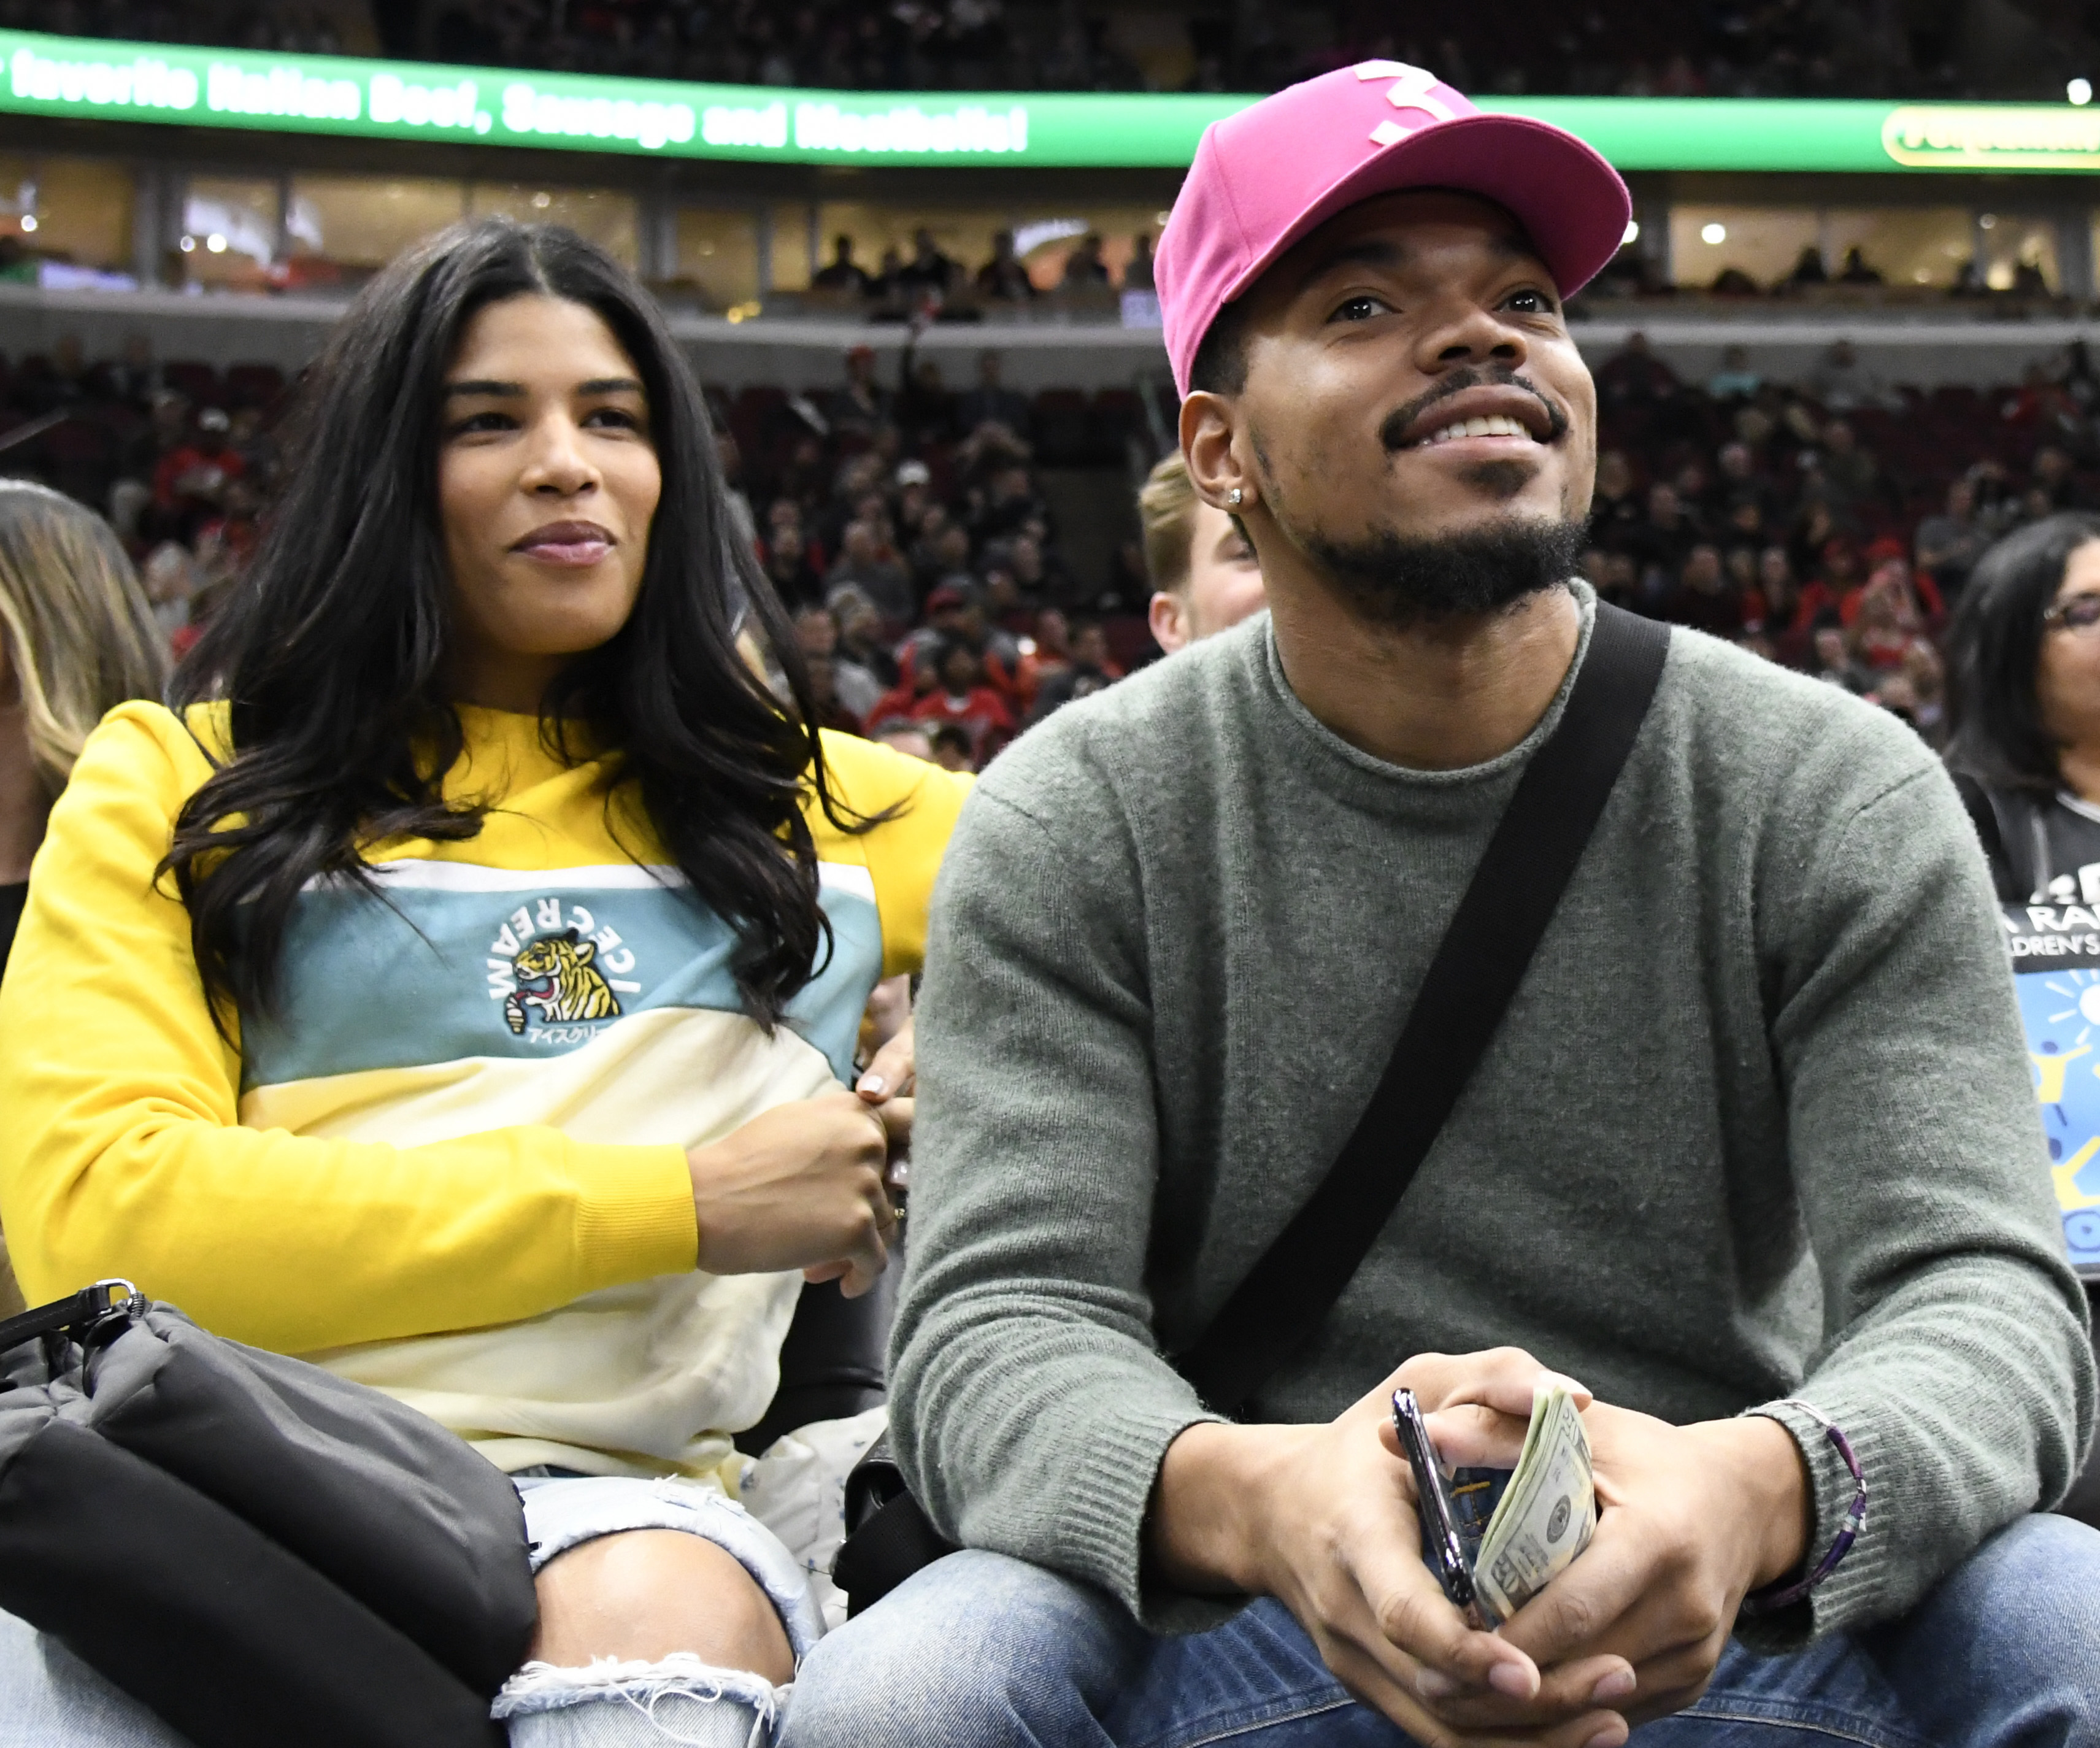 Chance the Rapper marries longtime girlfriend | Inquirer Entertainment.